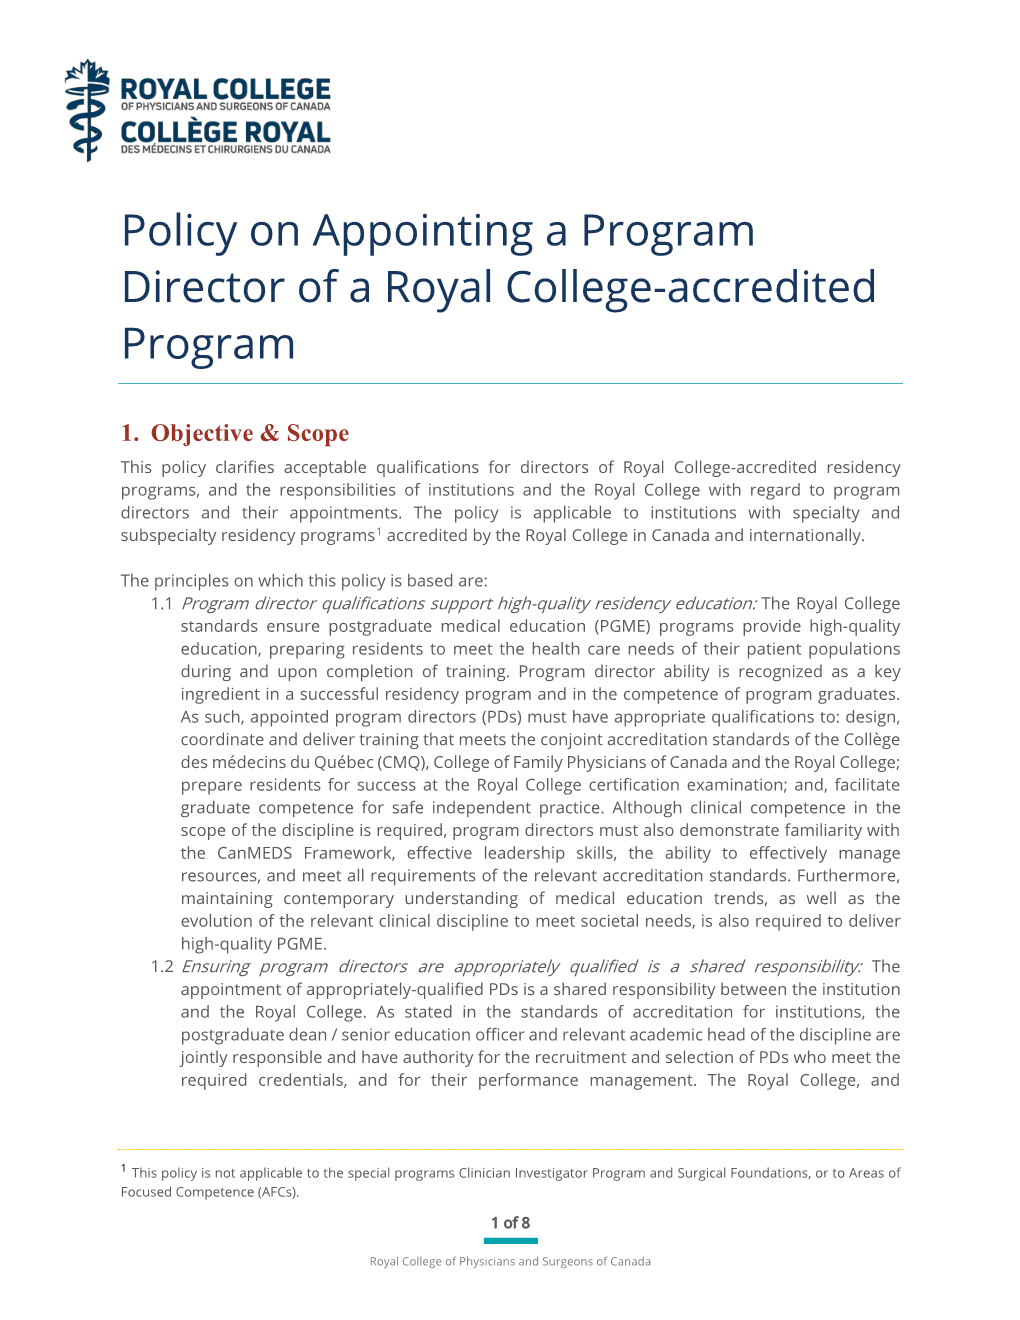 Policy on Appointing a Program Director of a Royal College-Accredited Program